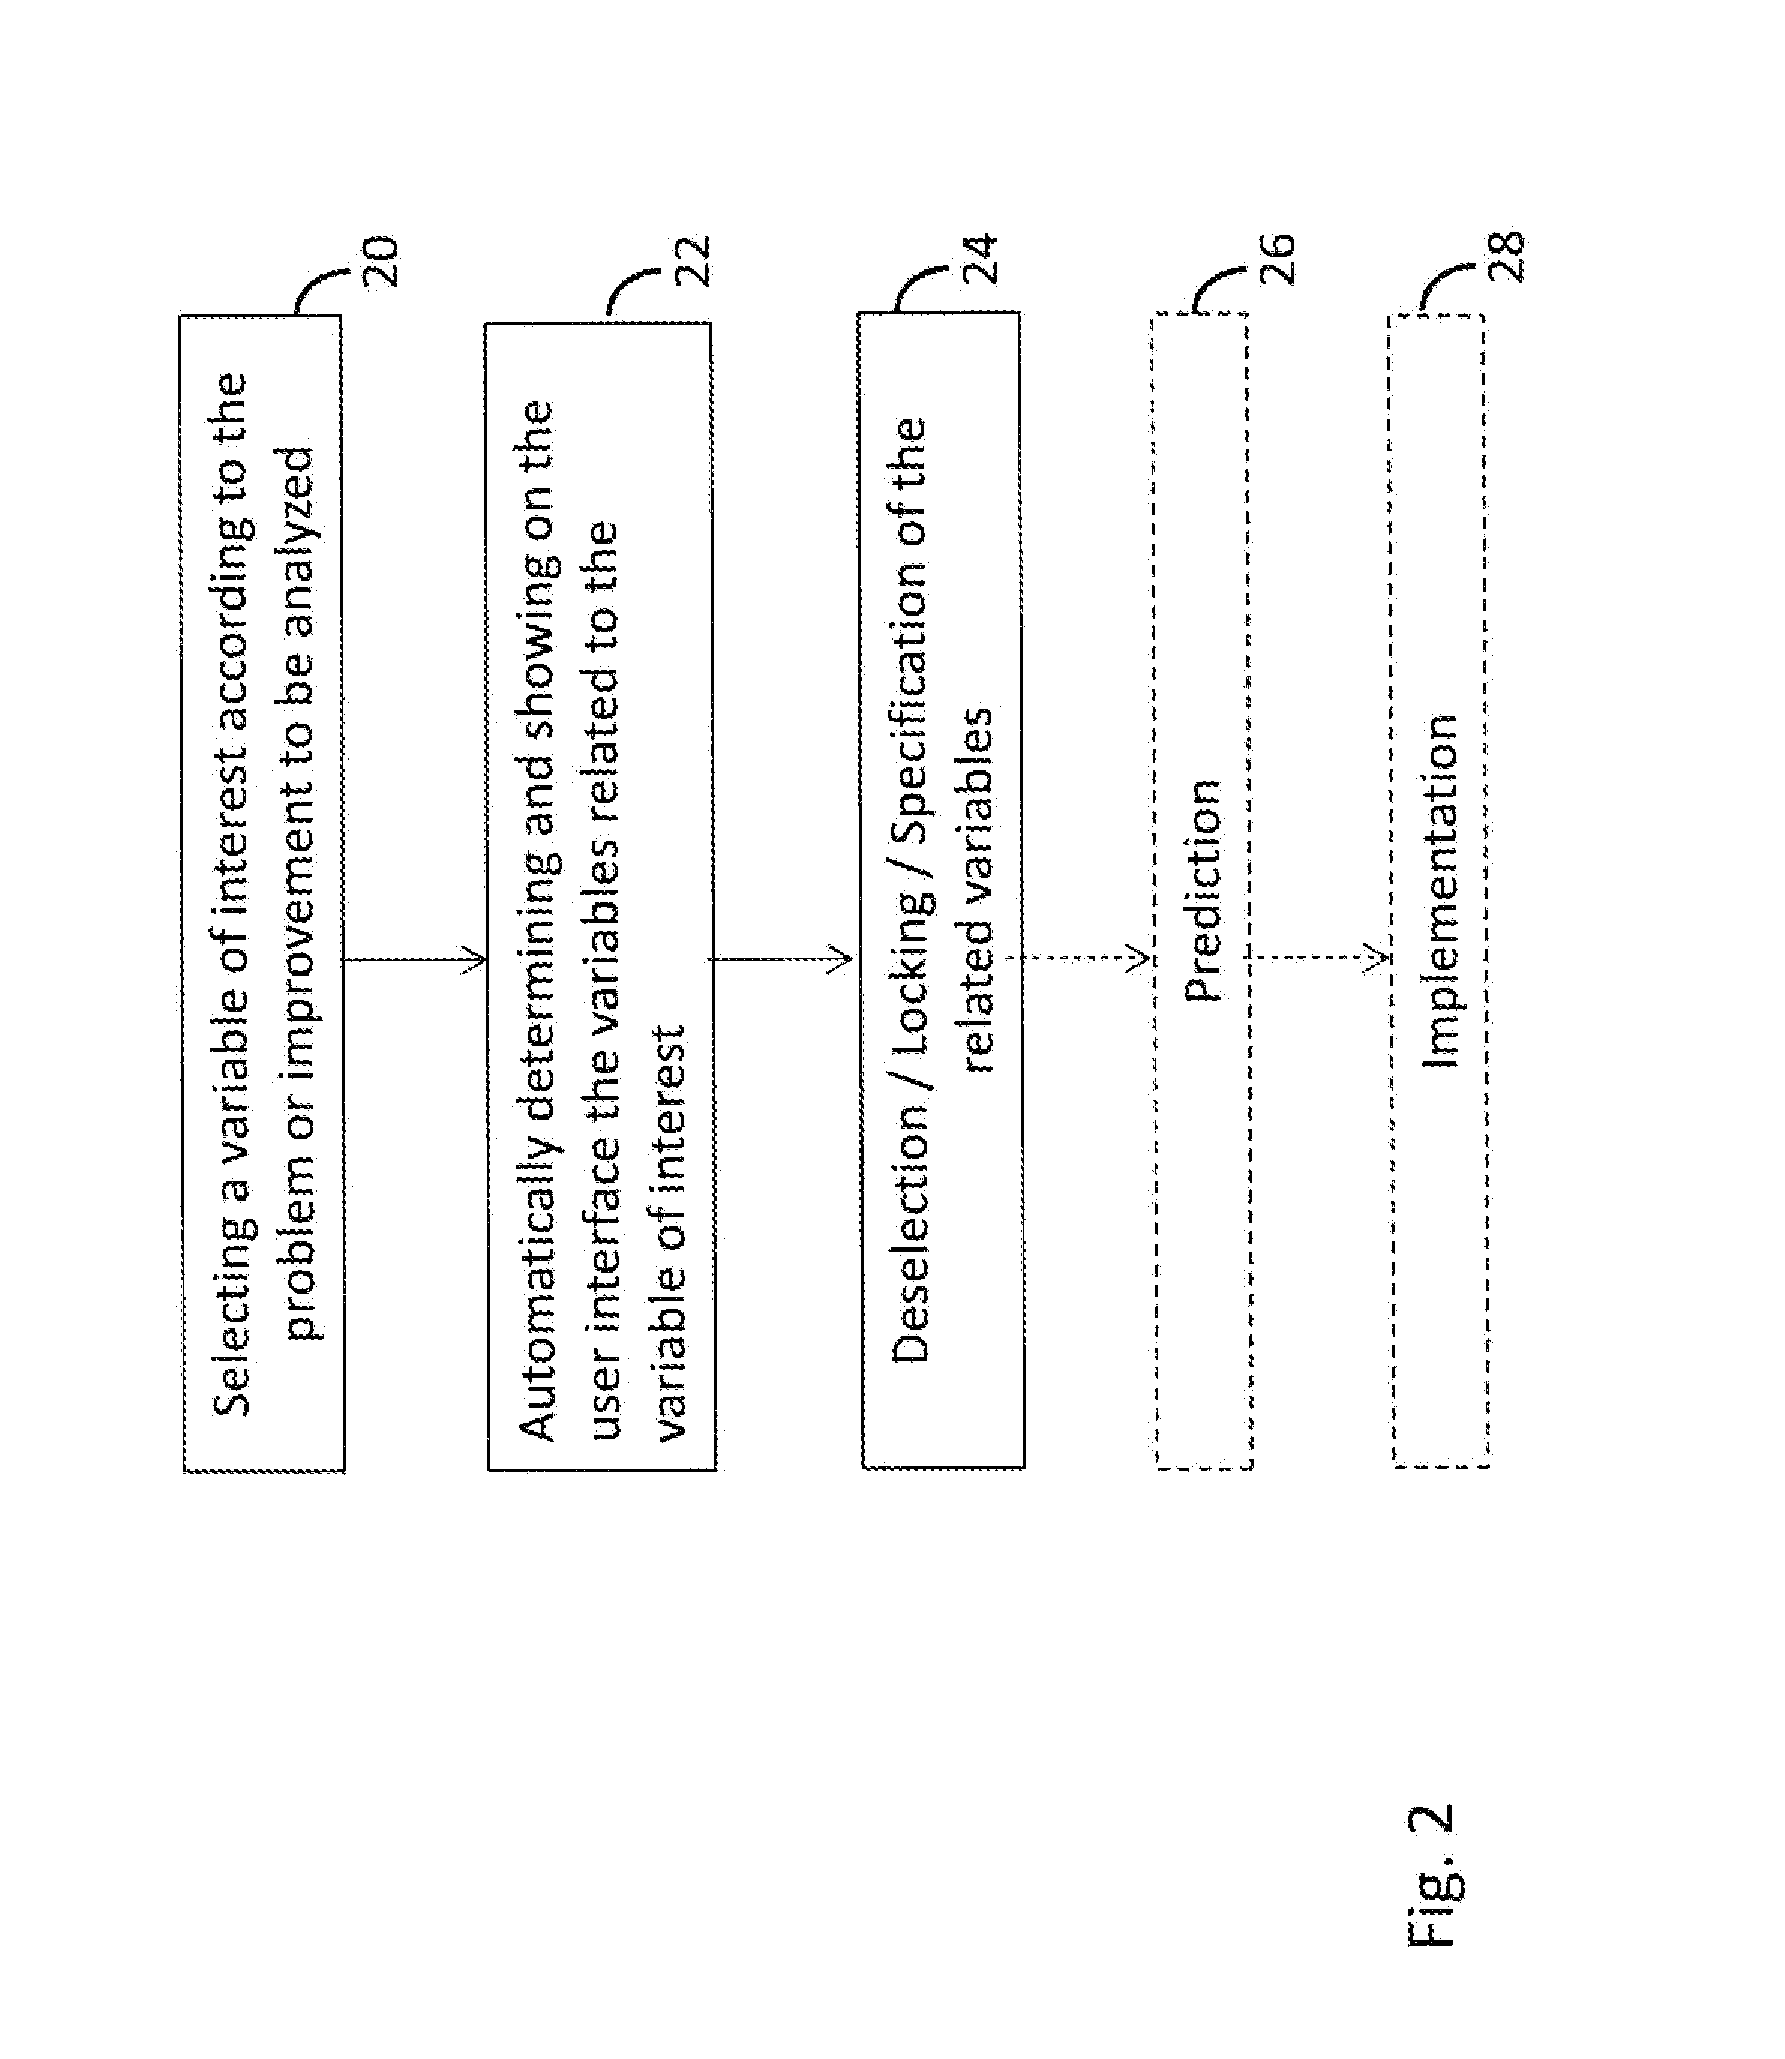 Method of operating a process or machine